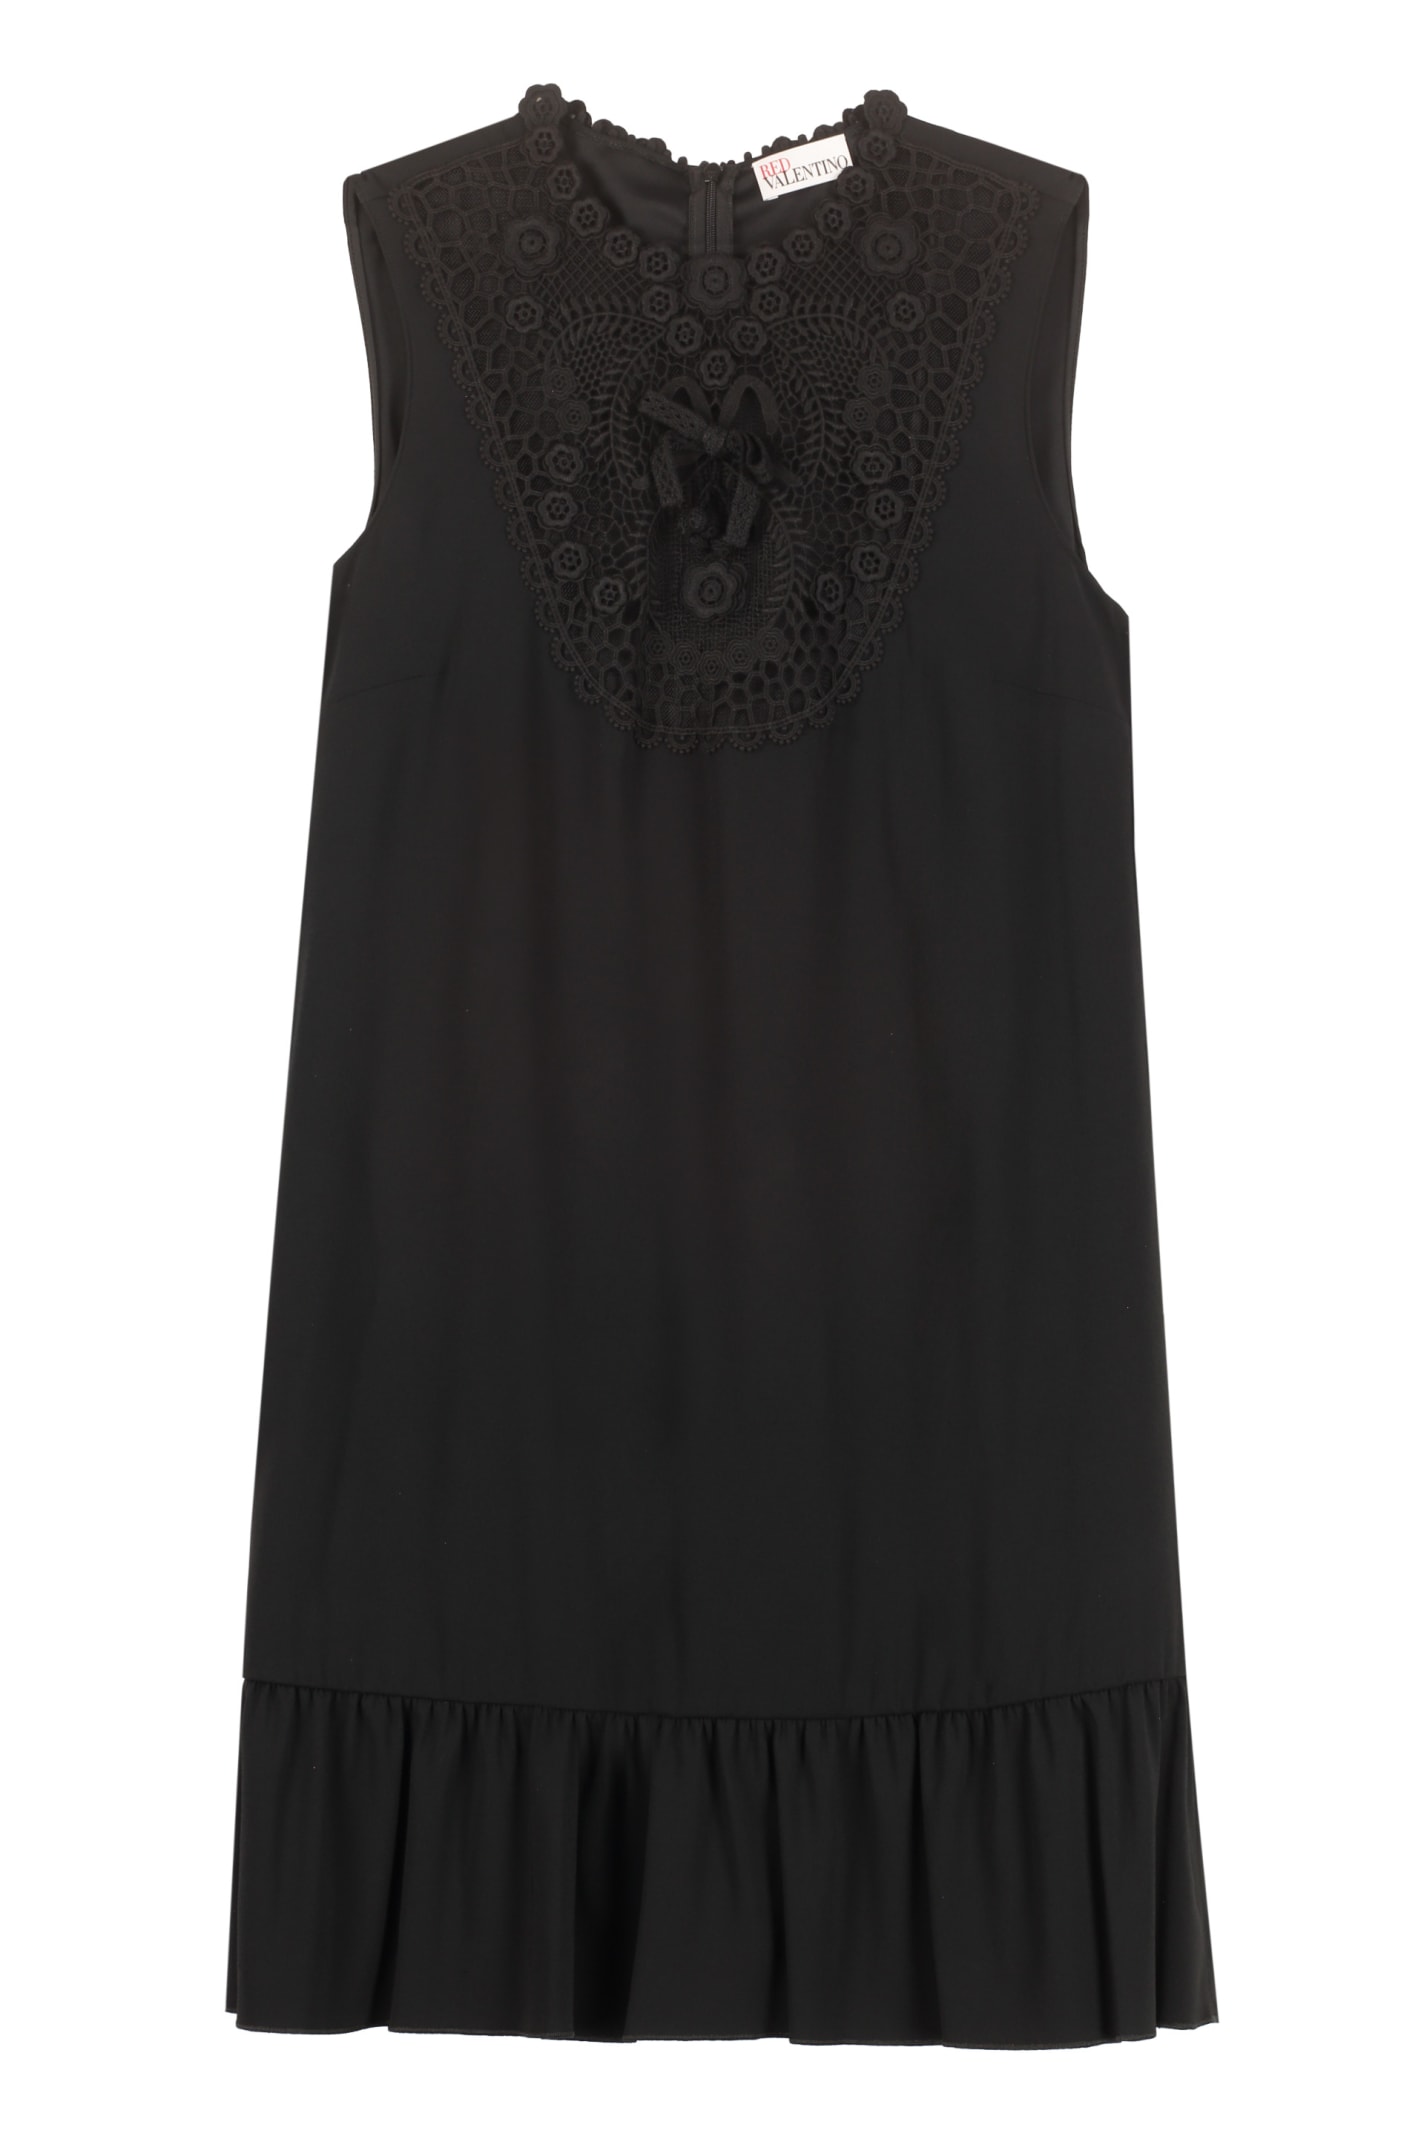 Red Valentino Lace Detail Dress In Black